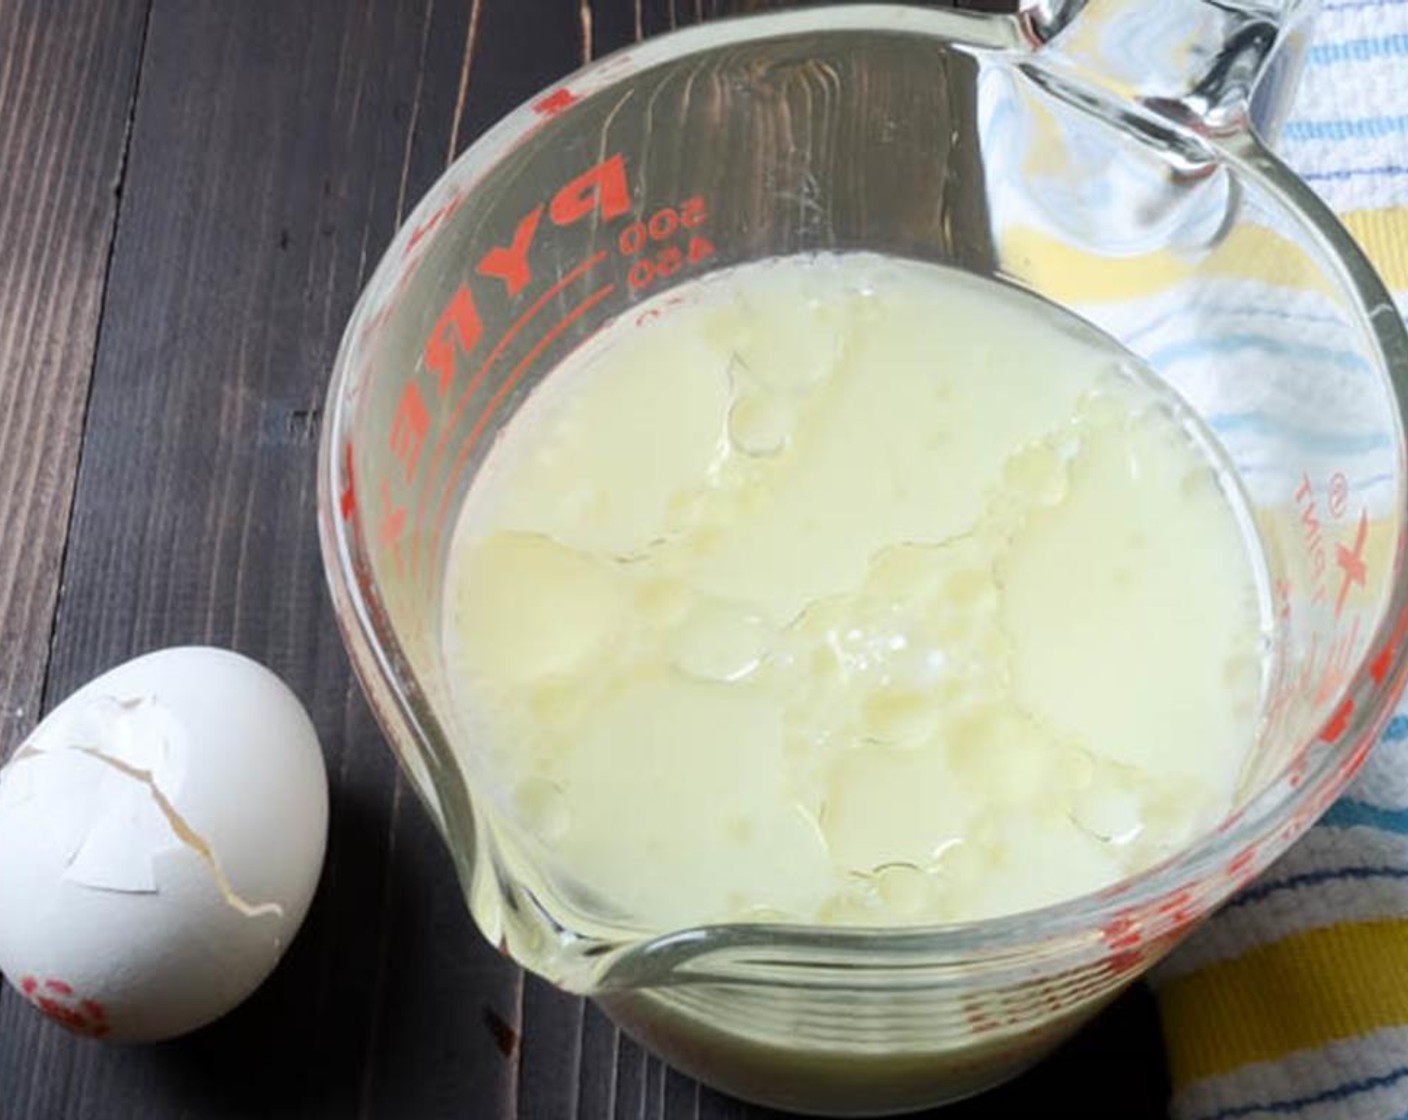 step 3 In a small bowl or two-cup measuring cup, add the Milk (1 1/2 cups), Egg (1) and Vegetable Oil (2 Tbsp). Whisk to combine.